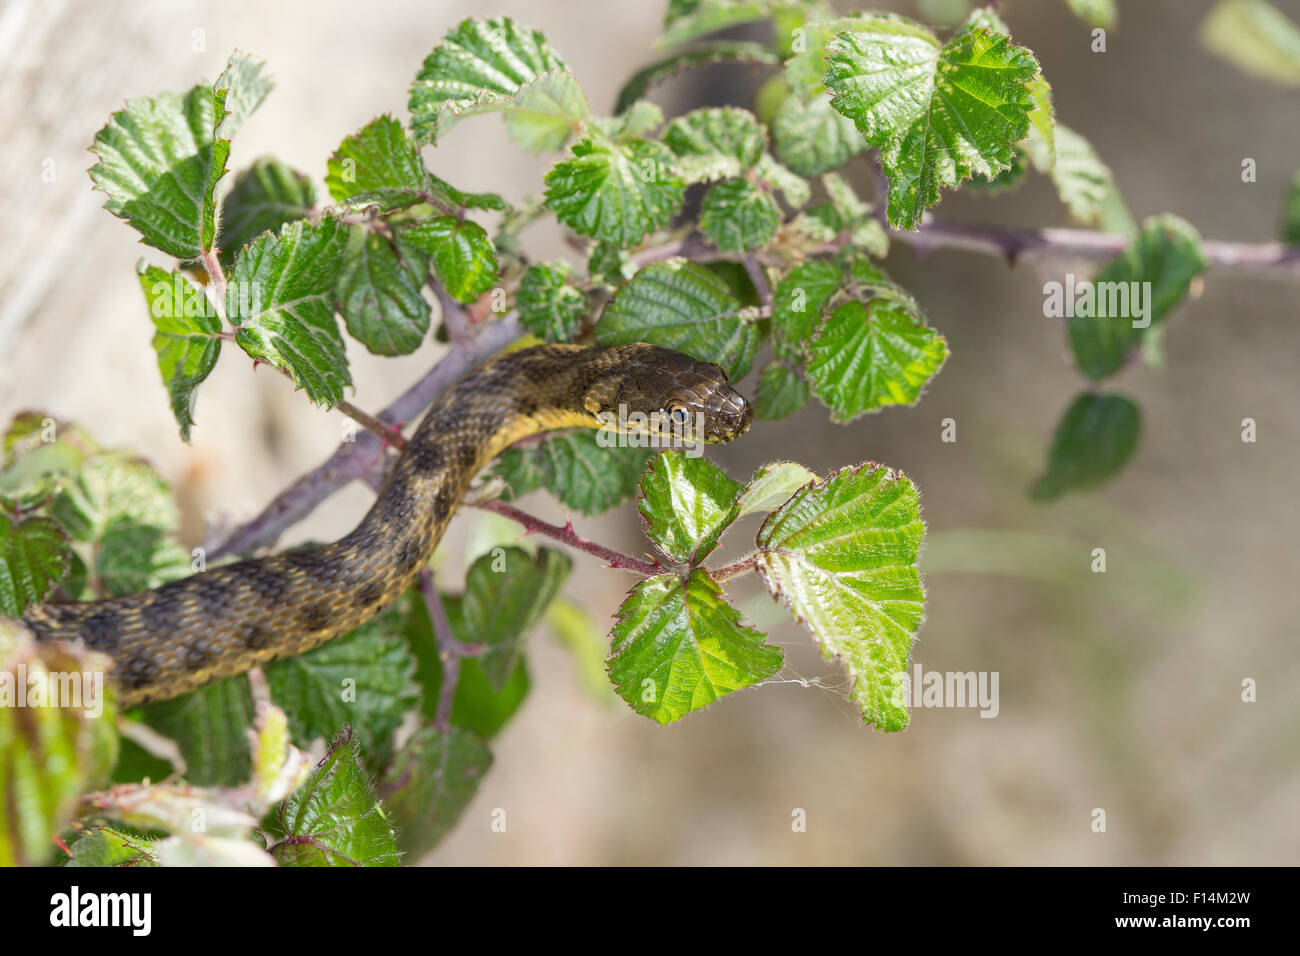 Viperine Snake, viperine water snake, viperine grass snake, Vipernnatter, Vipern-Natter, Natrix maura, Couleuvre vipérine Stock Photo